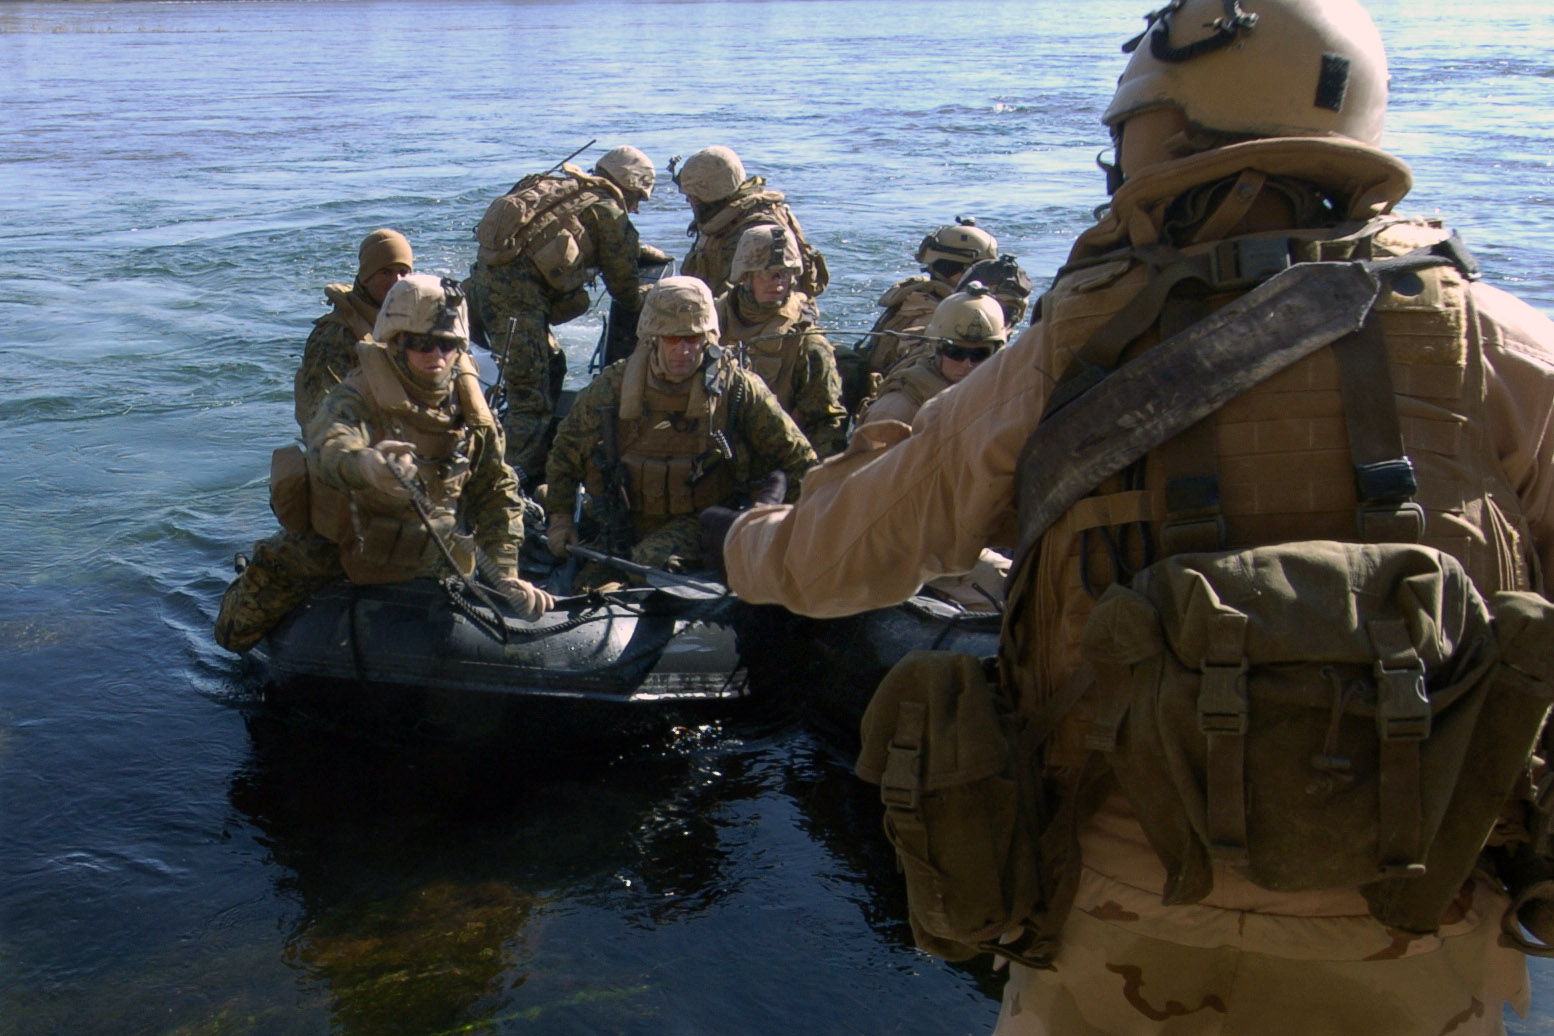 US_Navy_080106-N-8135W-240_Sailors_attached_to_Riverine_Squadron_(RIVRON)_2_Detachment_3_come_ashore_after_searching_islands_on_the_Euphrates_River_for_weapons_caches.jpg